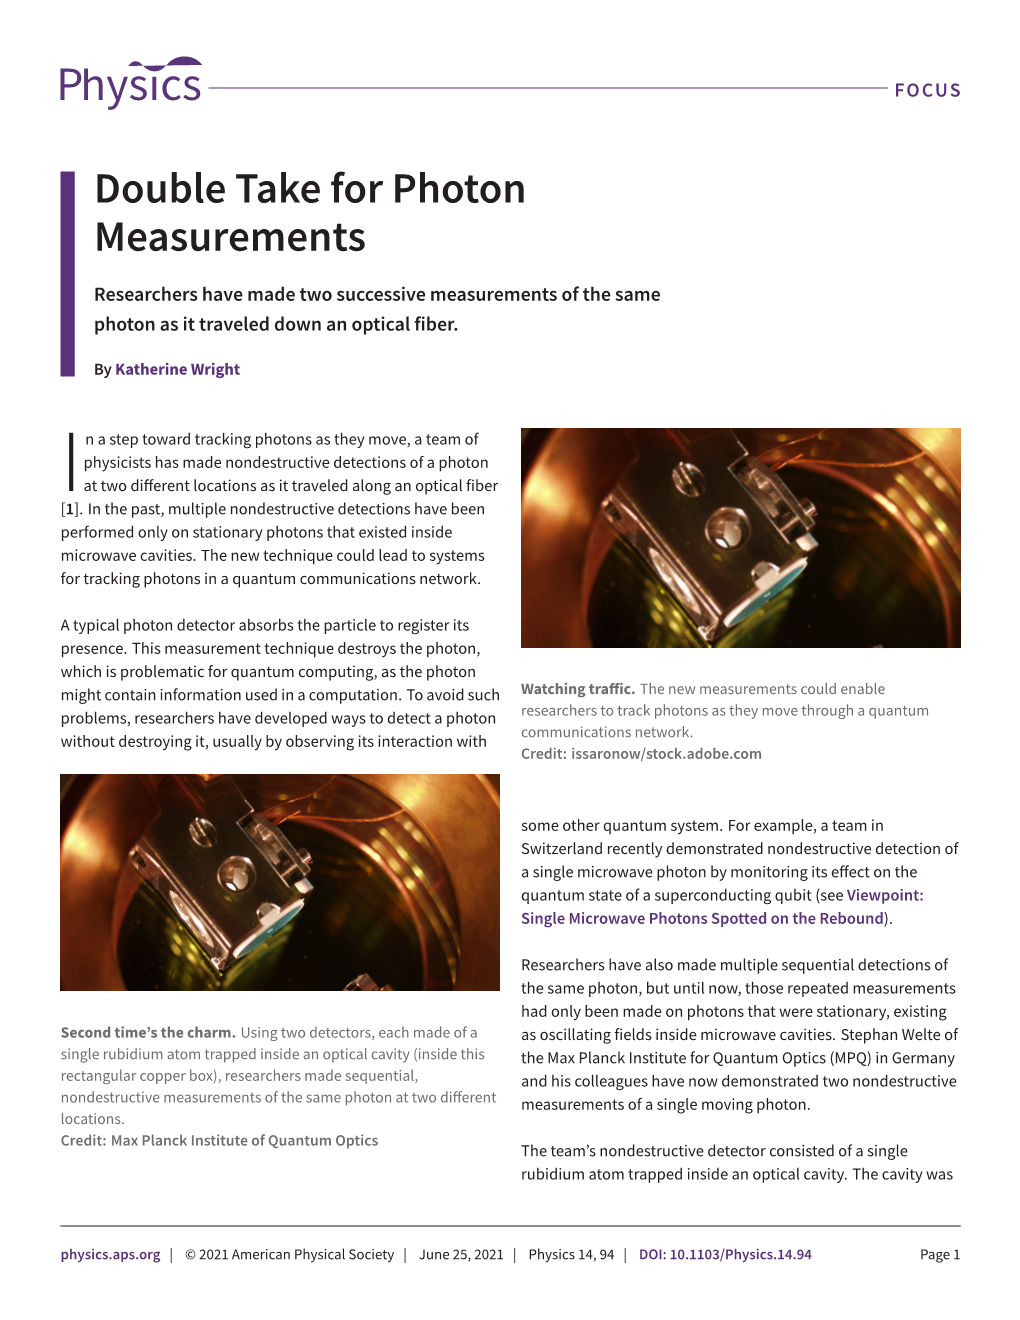 Double Take for Photon Measurements